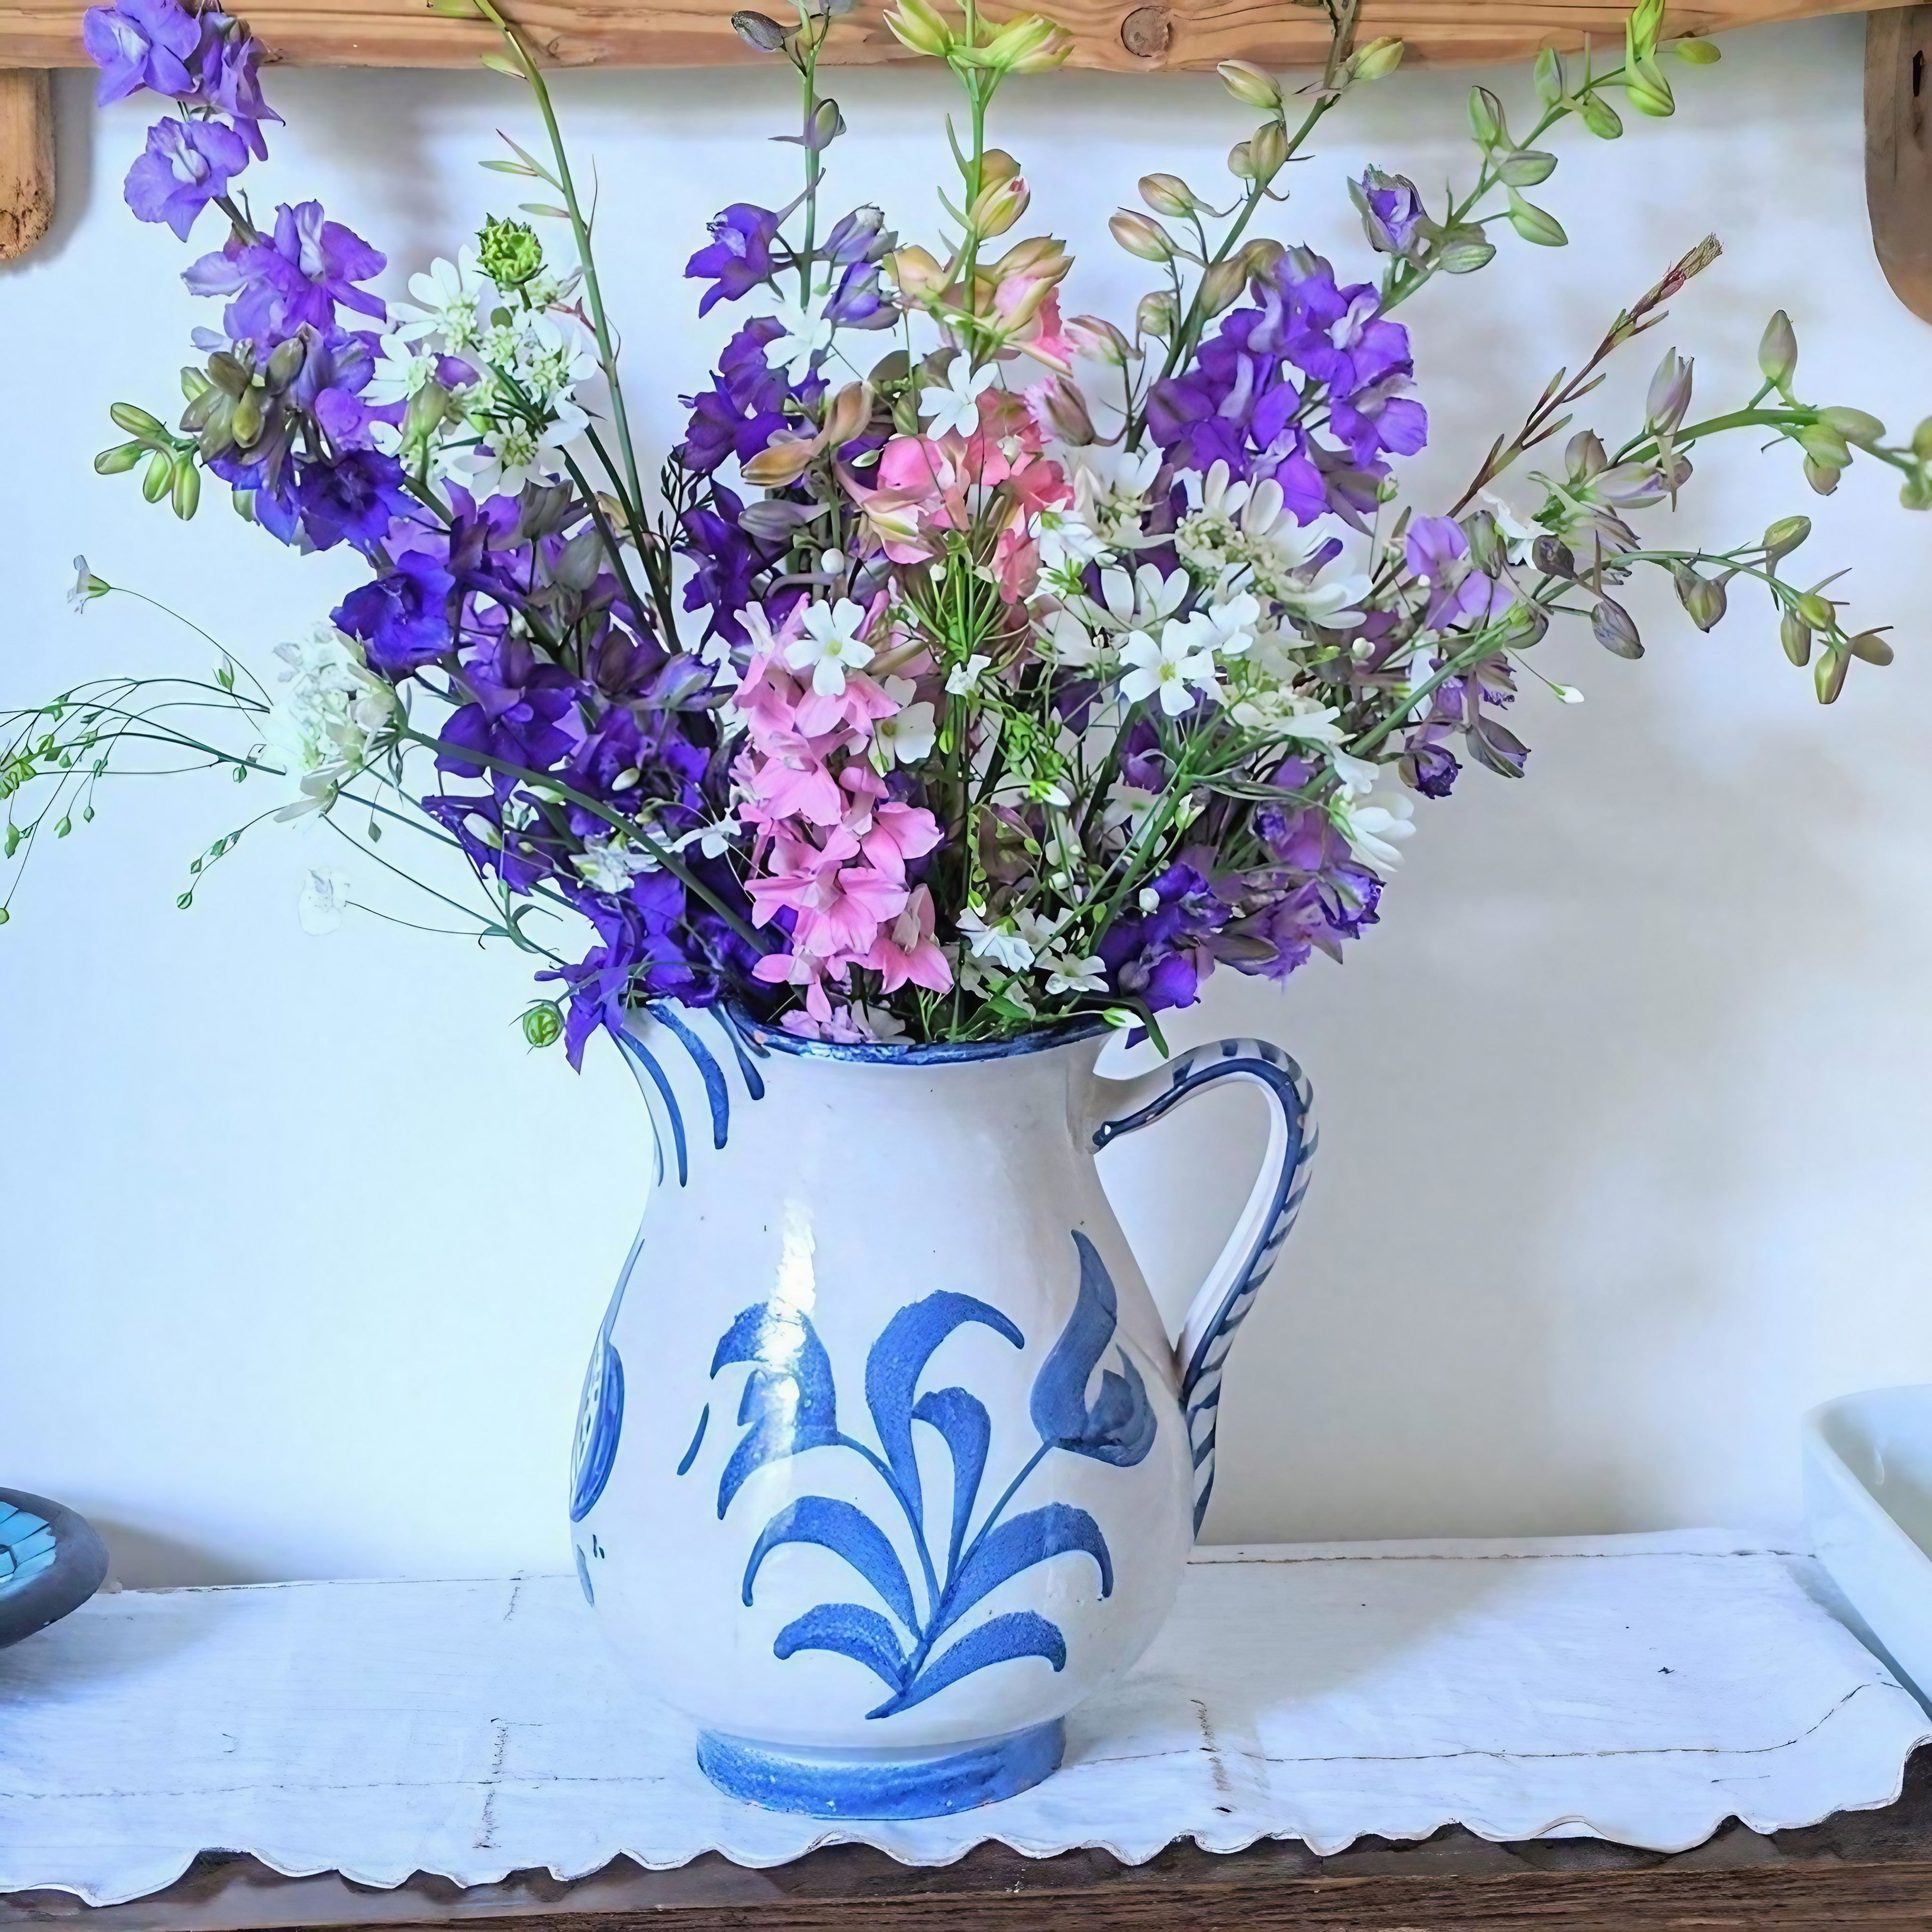 Larkspur Giant Imperial Mix flowers displayed in a blue and white ceramic pitcher